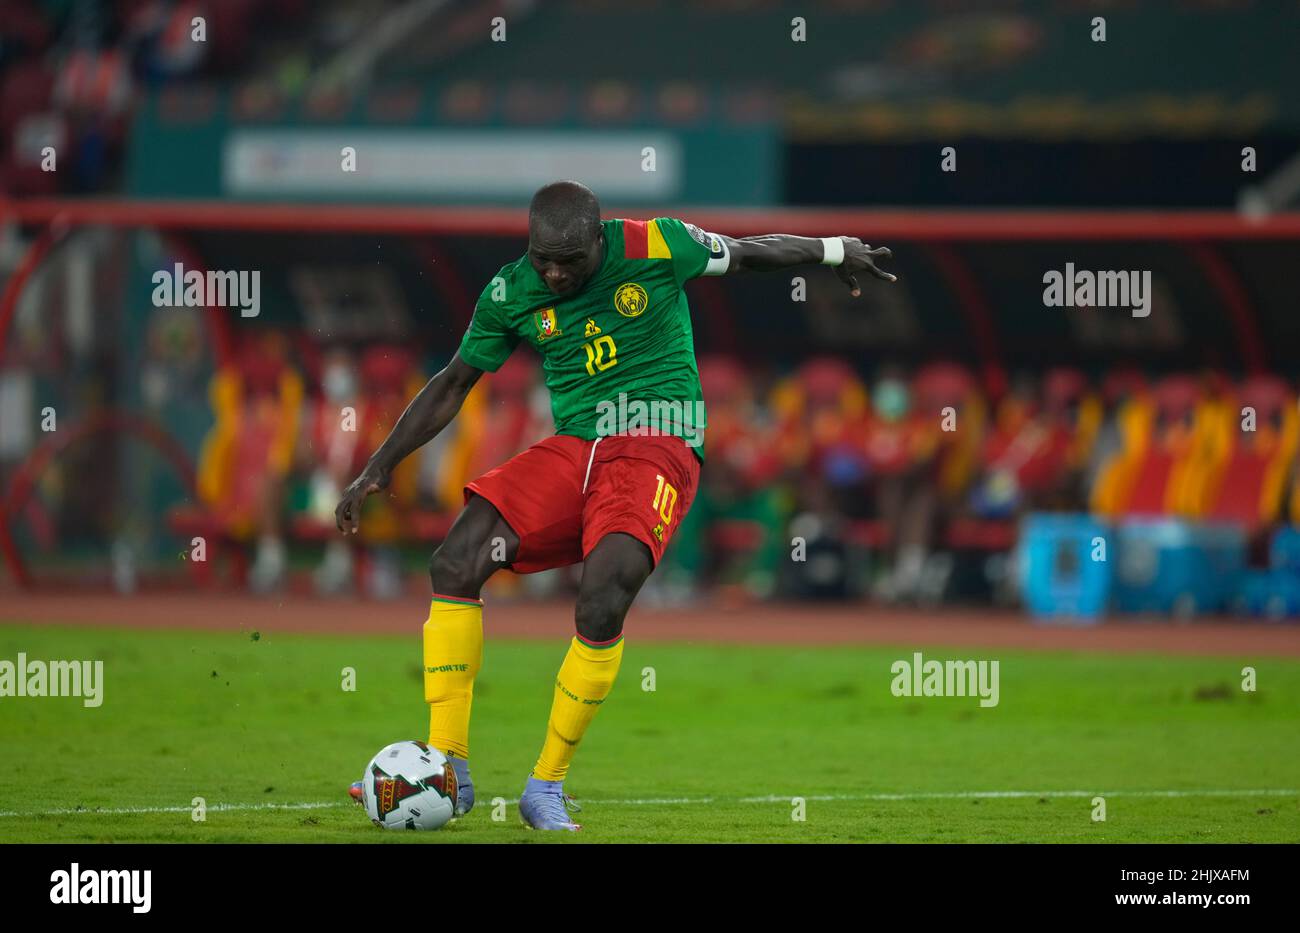 Yaounde, Cameroon, January, 24, 2022: Vincent Aboubakar of Cameroon during Cameroun versus Comoros - Africa Cup of Nations at Olembe stadium. Kim Price/CSM. Stock Photo